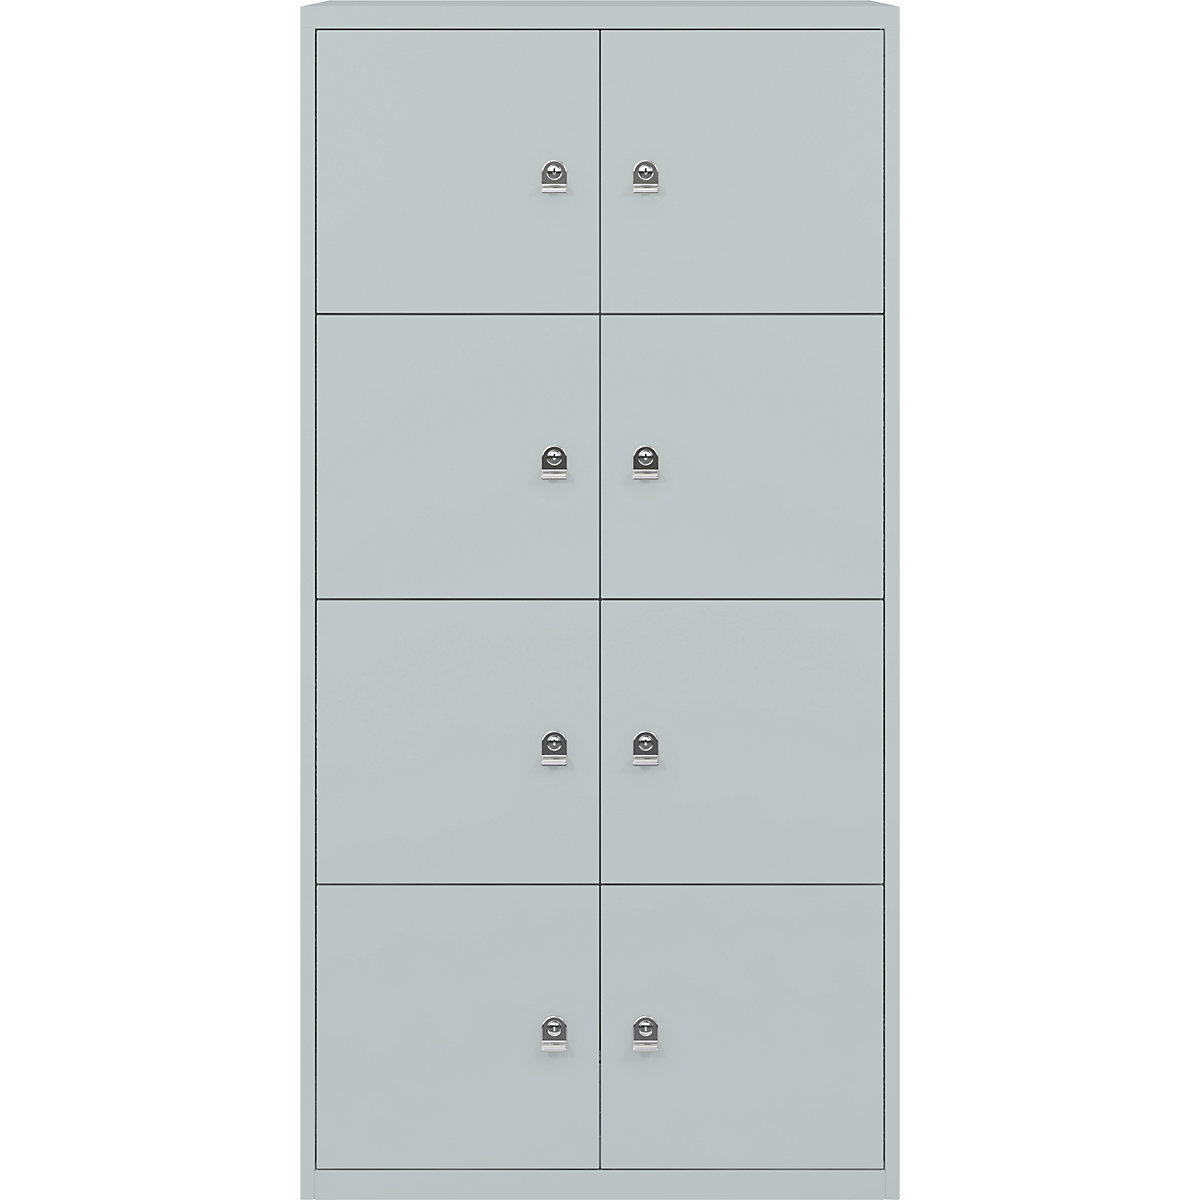 BISLEY – LateralFile™ lodge, with 8 lockable compartments, height 375 mm each, silver